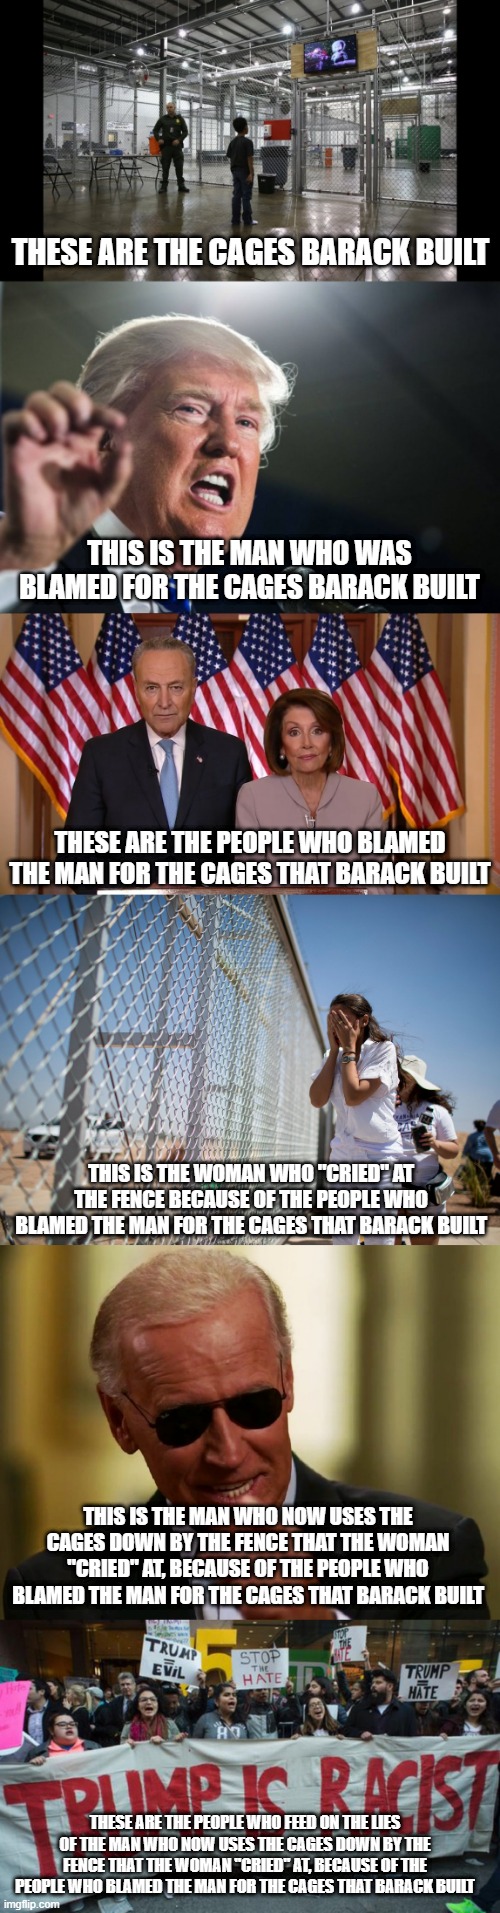 A modern political nursery rhyme...bum, buh bum, buh bum, buh bum, buh bum, buh bum, buh bum... | THESE ARE THE CAGES BARACK BUILT; THIS IS THE MAN WHO WAS BLAMED FOR THE CAGES BARACK BUILT; THESE ARE THE PEOPLE WHO BLAMED THE MAN FOR THE CAGES THAT BARACK BUILT; THIS IS THE WOMAN WHO "CRIED" AT THE FENCE BECAUSE OF THE PEOPLE WHO BLAMED THE MAN FOR THE CAGES THAT BARACK BUILT; THIS IS THE MAN WHO NOW USES THE CAGES DOWN BY THE FENCE THAT THE WOMAN "CRIED" AT, BECAUSE OF THE PEOPLE WHO BLAMED THE MAN FOR THE CAGES THAT BARACK BUILT; THESE ARE THE PEOPLE WHO FEED ON THE LIES OF THE MAN WHO NOW USES THE CAGES DOWN BY THE FENCE THAT THE WOMAN "CRIED" AT, BECAUSE OF THE PEOPLE WHO BLAMED THE MAN FOR THE CAGES THAT BARACK BUILT | image tagged in children cage tv migrant,donald trump,chuck and nancy,aoc border,cool joe biden,liberalism is hate | made w/ Imgflip meme maker